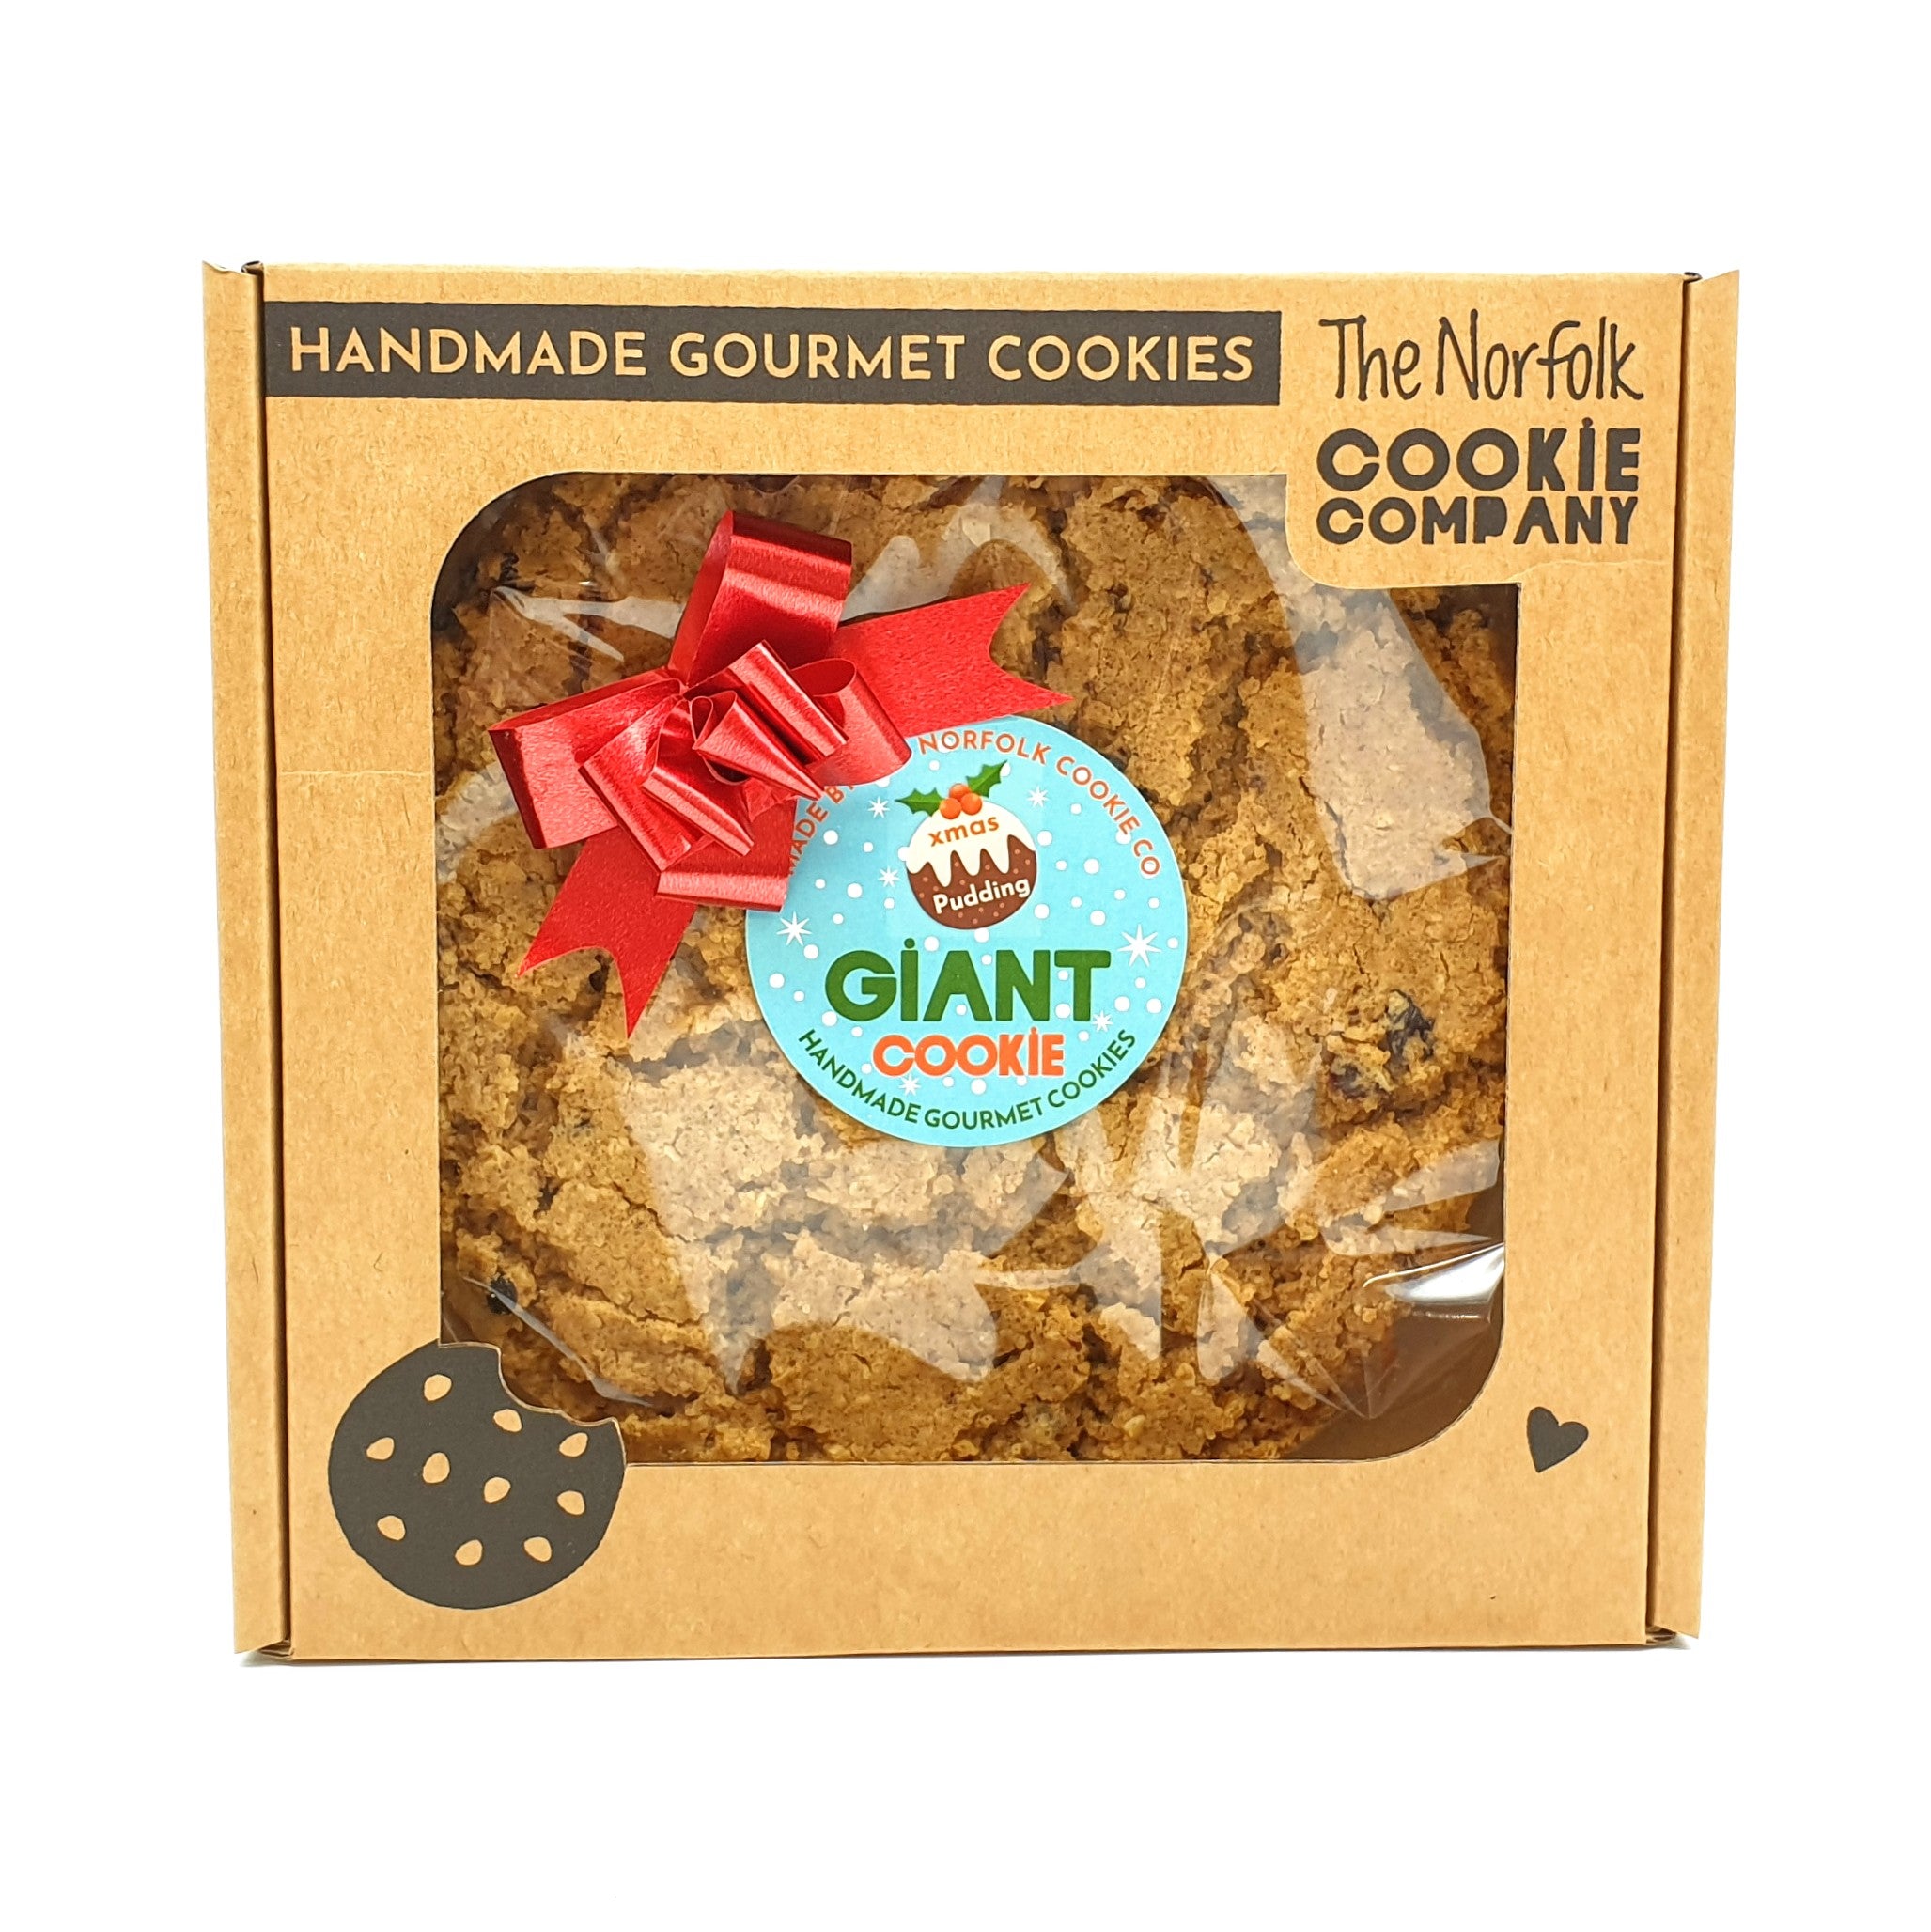 GIANT Cookie Gift Box - Xmas Pud